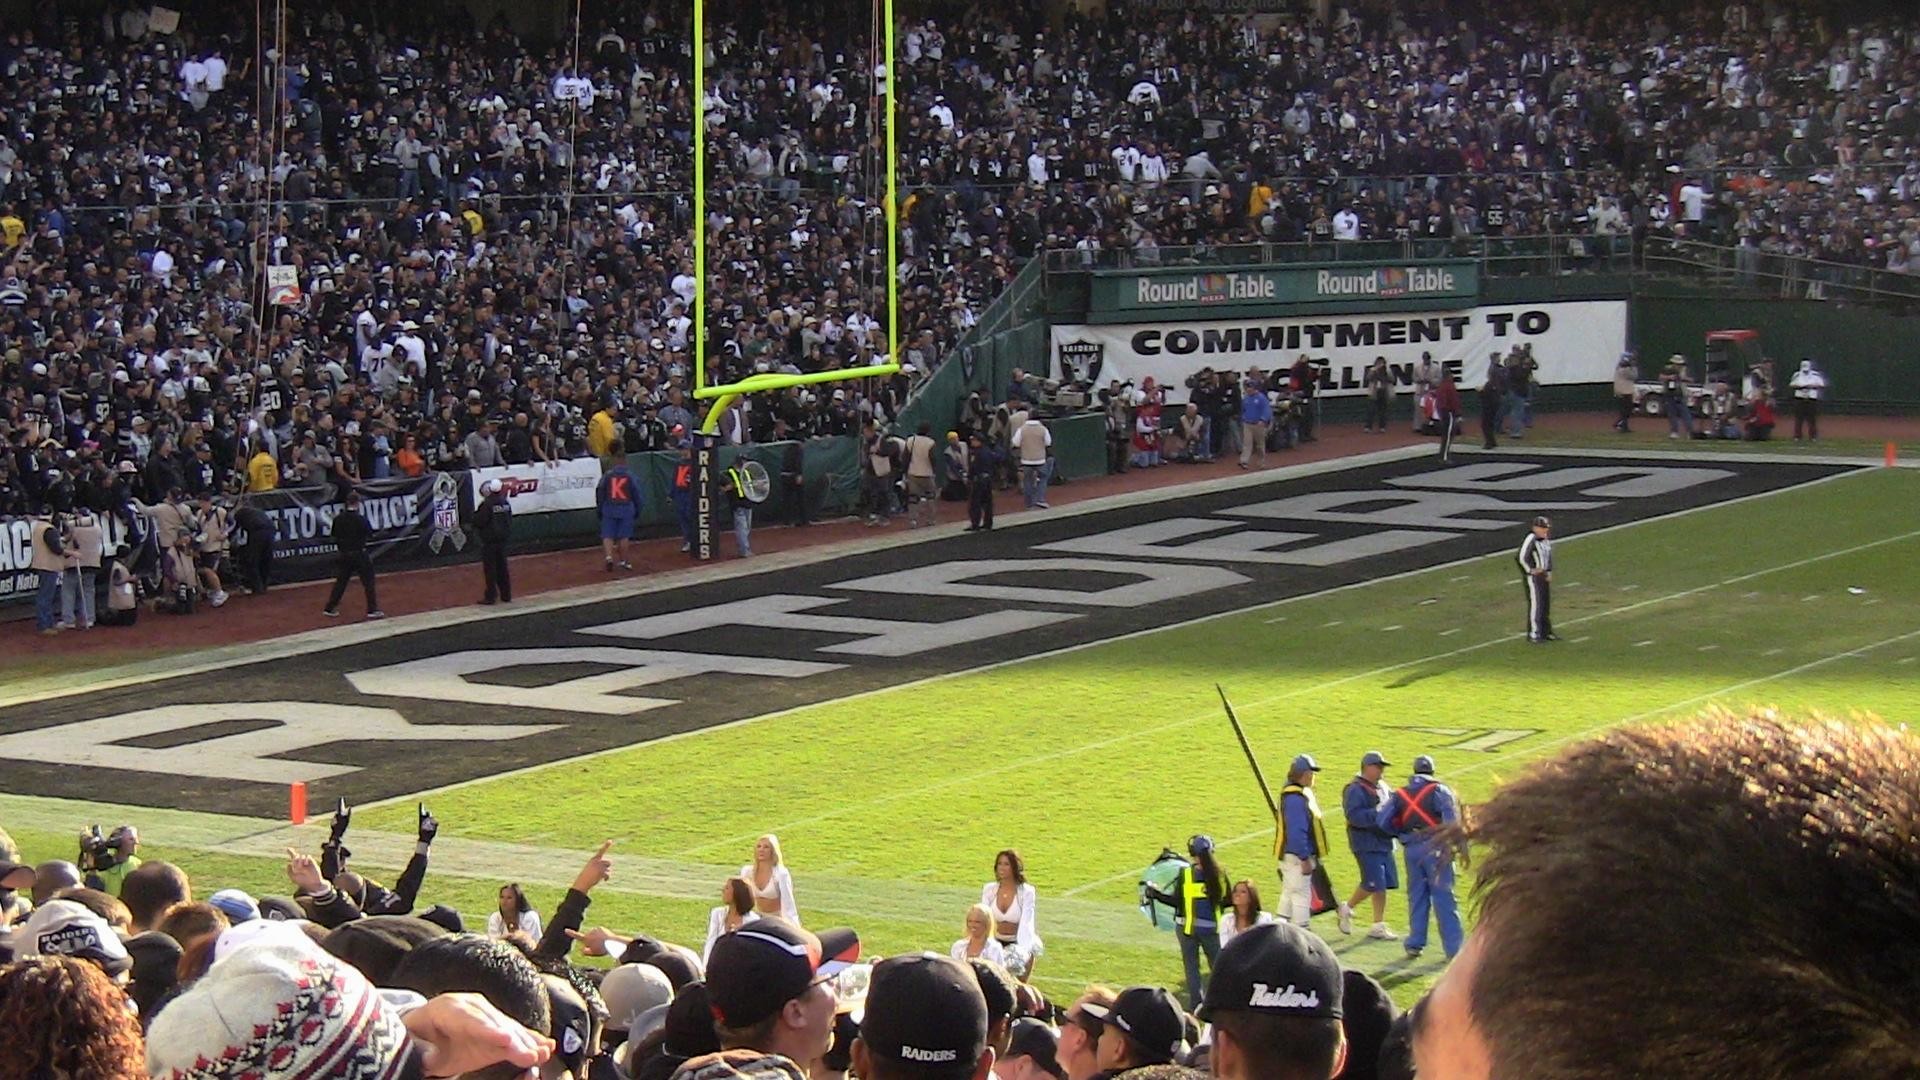 1920x1080 Oakland Raiders Desktop Pictures to Pin on Pinterest - PinsDaddy